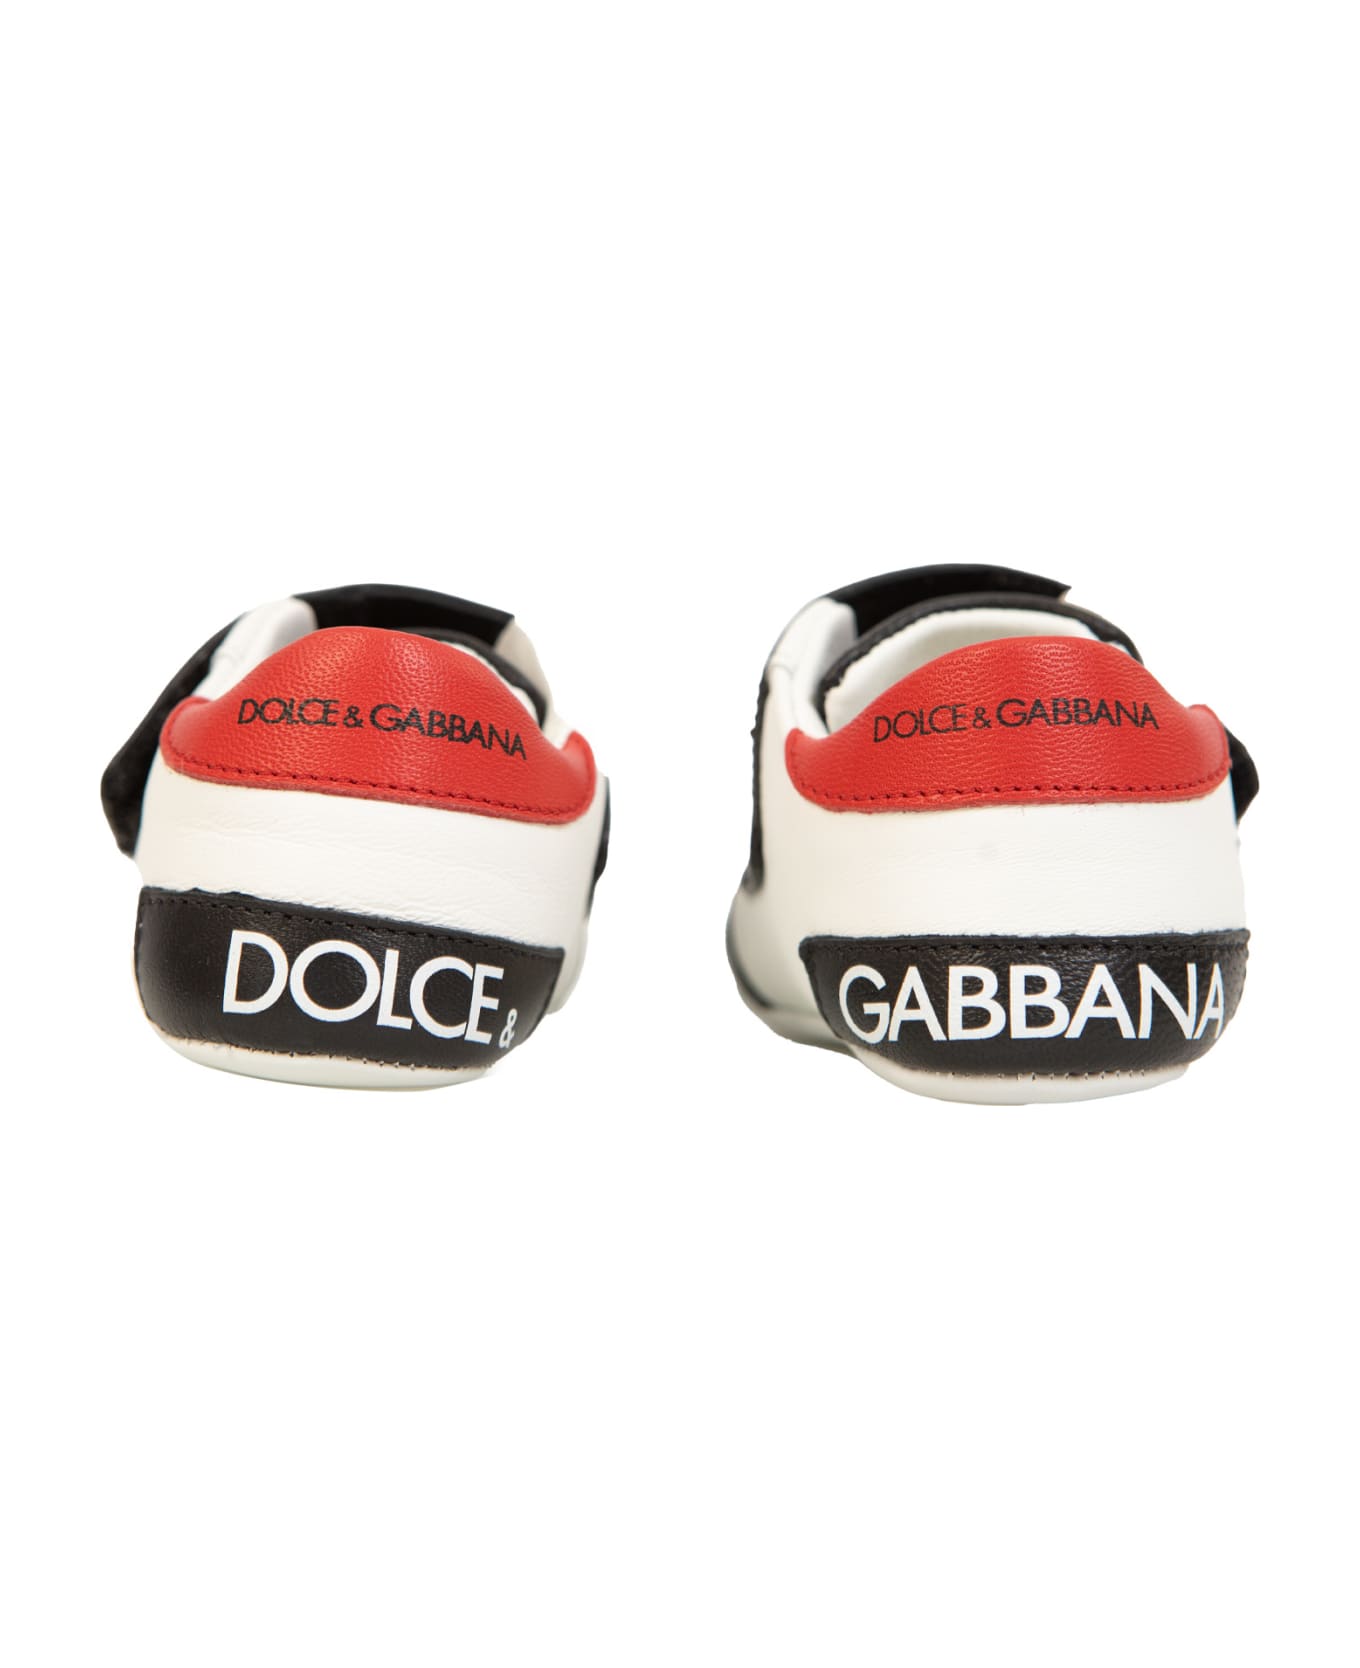 Dolce & Gabbana Leather Sneakers - Multicolor シューズ